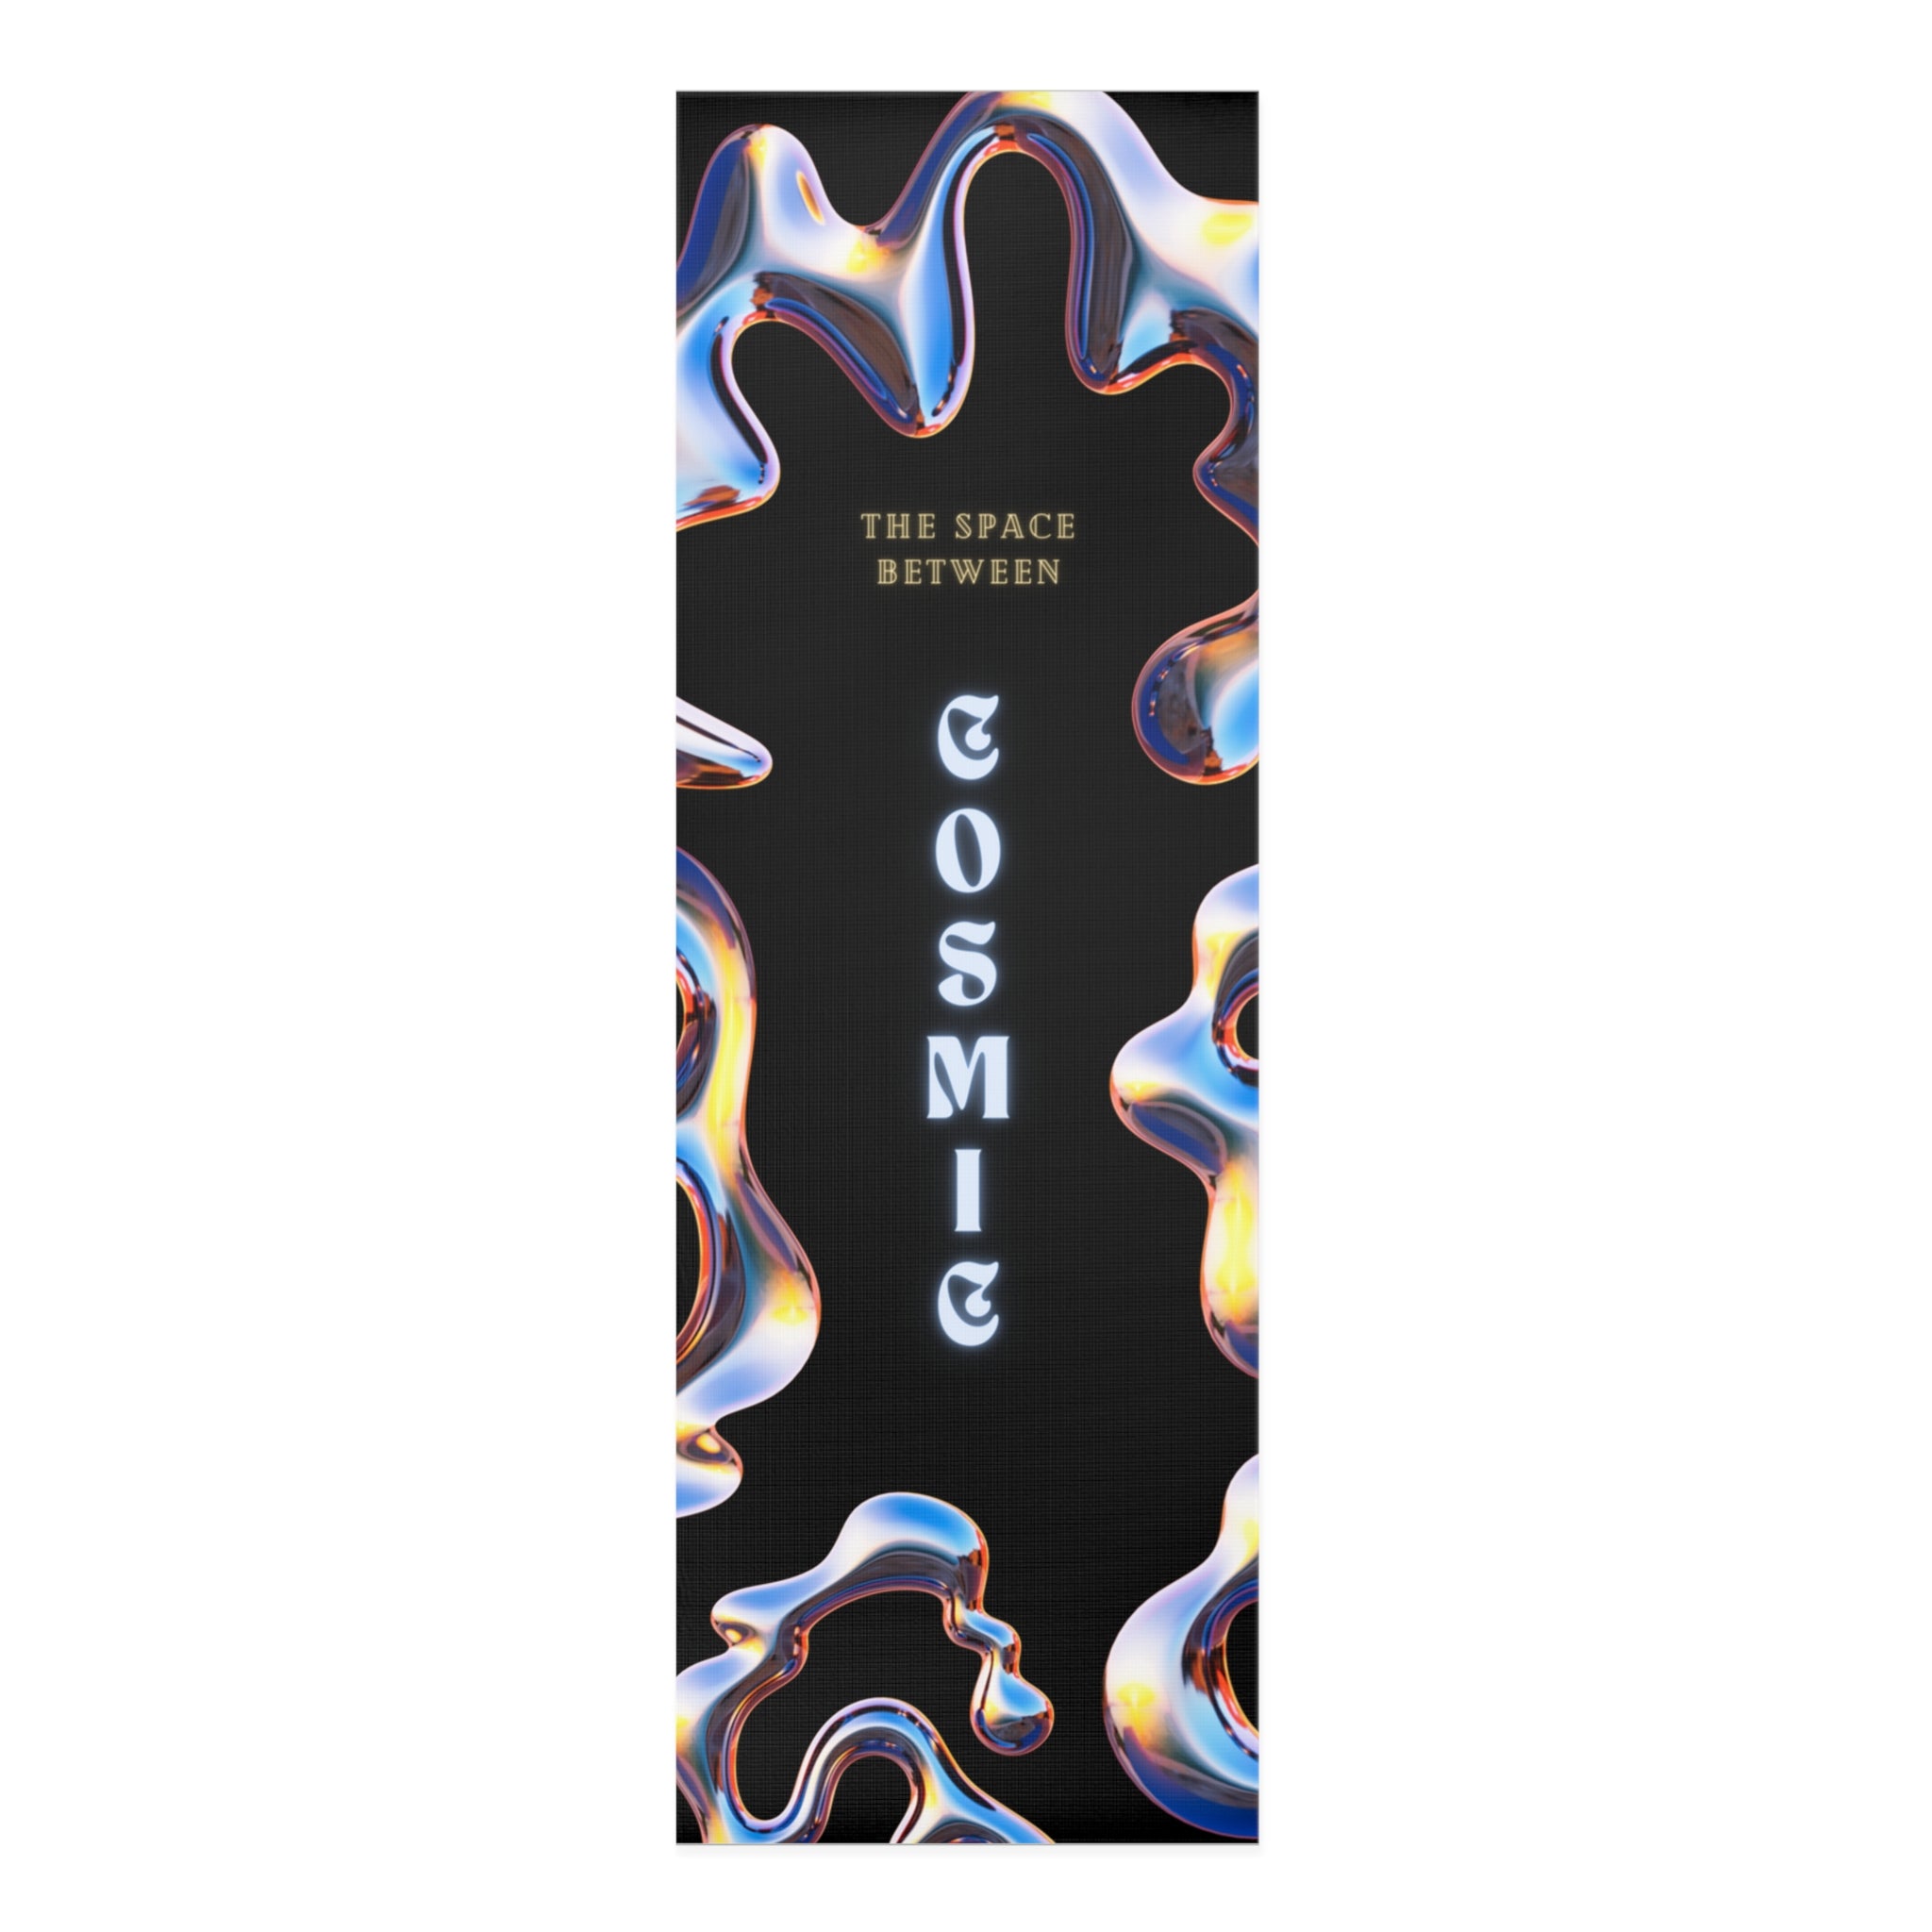 Find your space away from space with this unique Cosmic foam yoga mat. Mats are lightweight, cushion you from impacts, and measure 24" x 72" x 0.25" in size. Namaste!